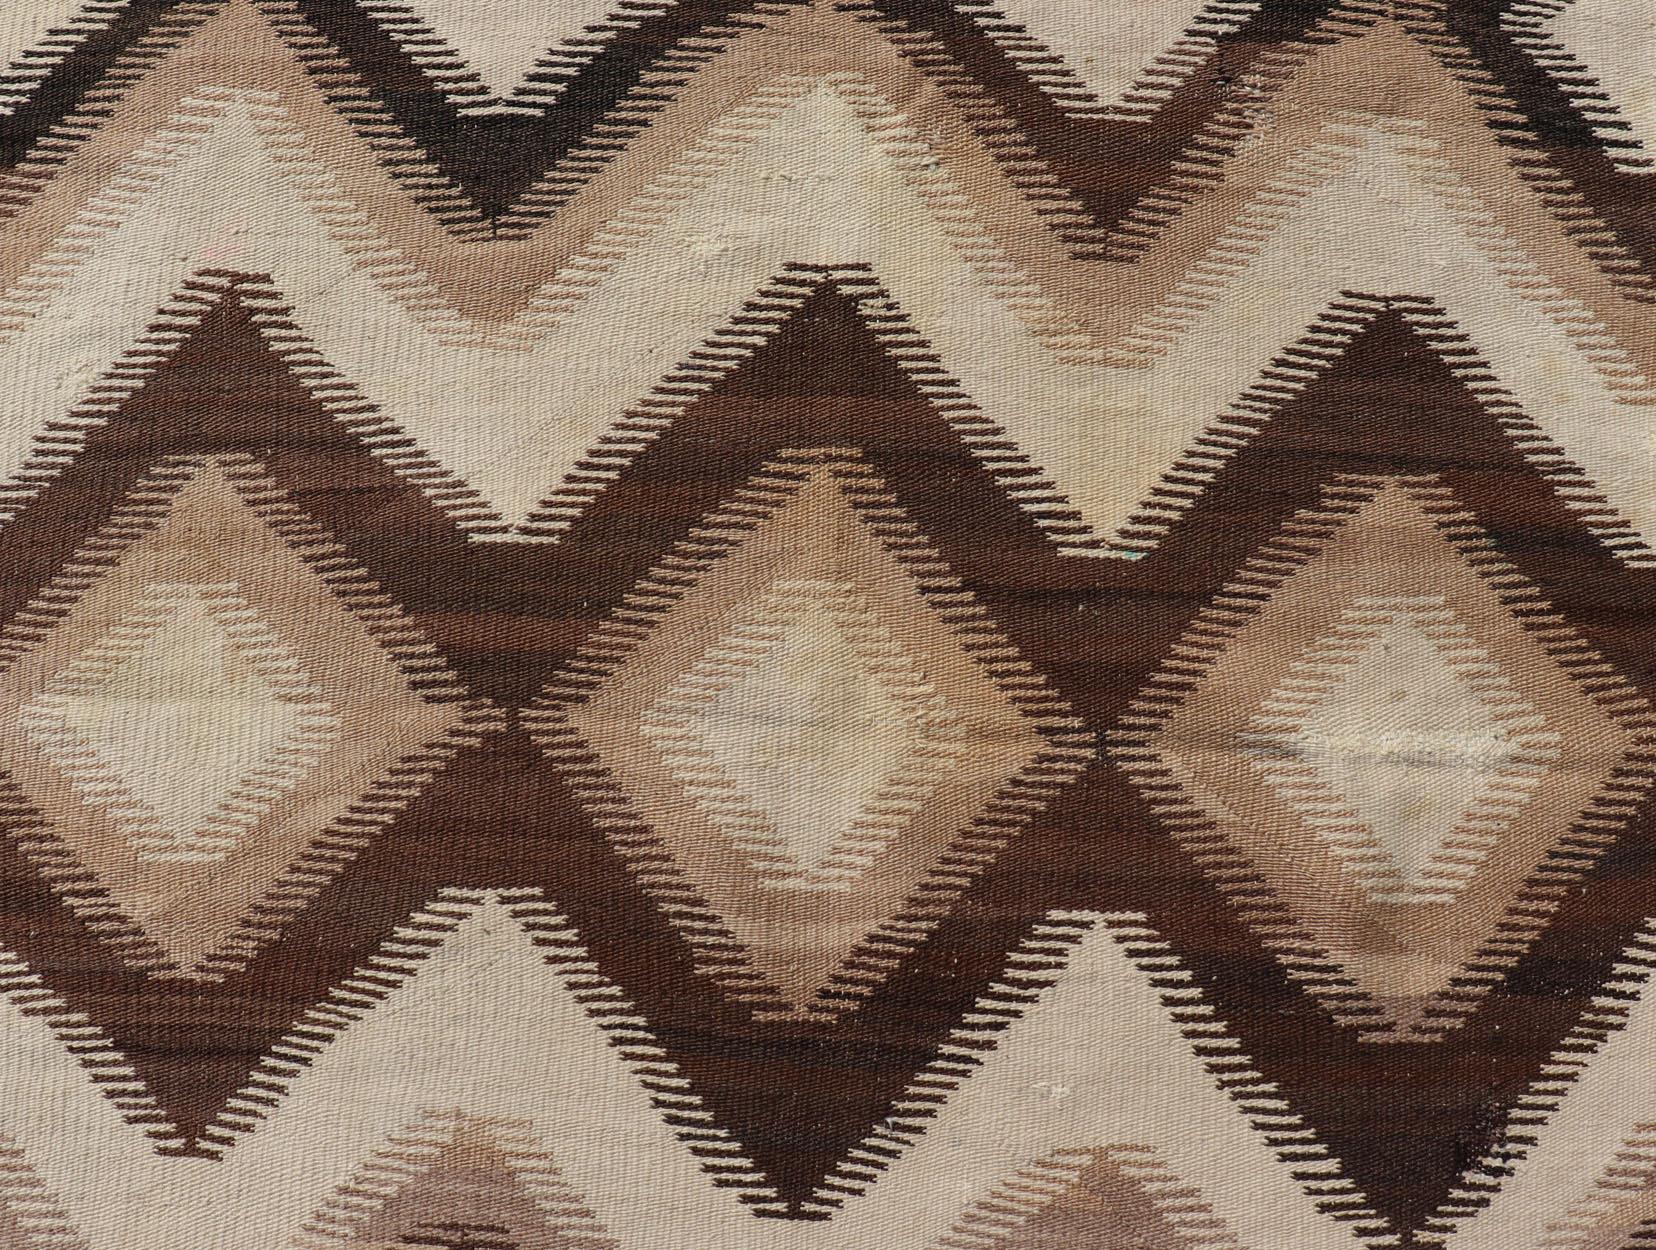 Hand-Woven American Navajo Rug with Geometric Diamond All-Over Design in Tan, Brown, Cream For Sale